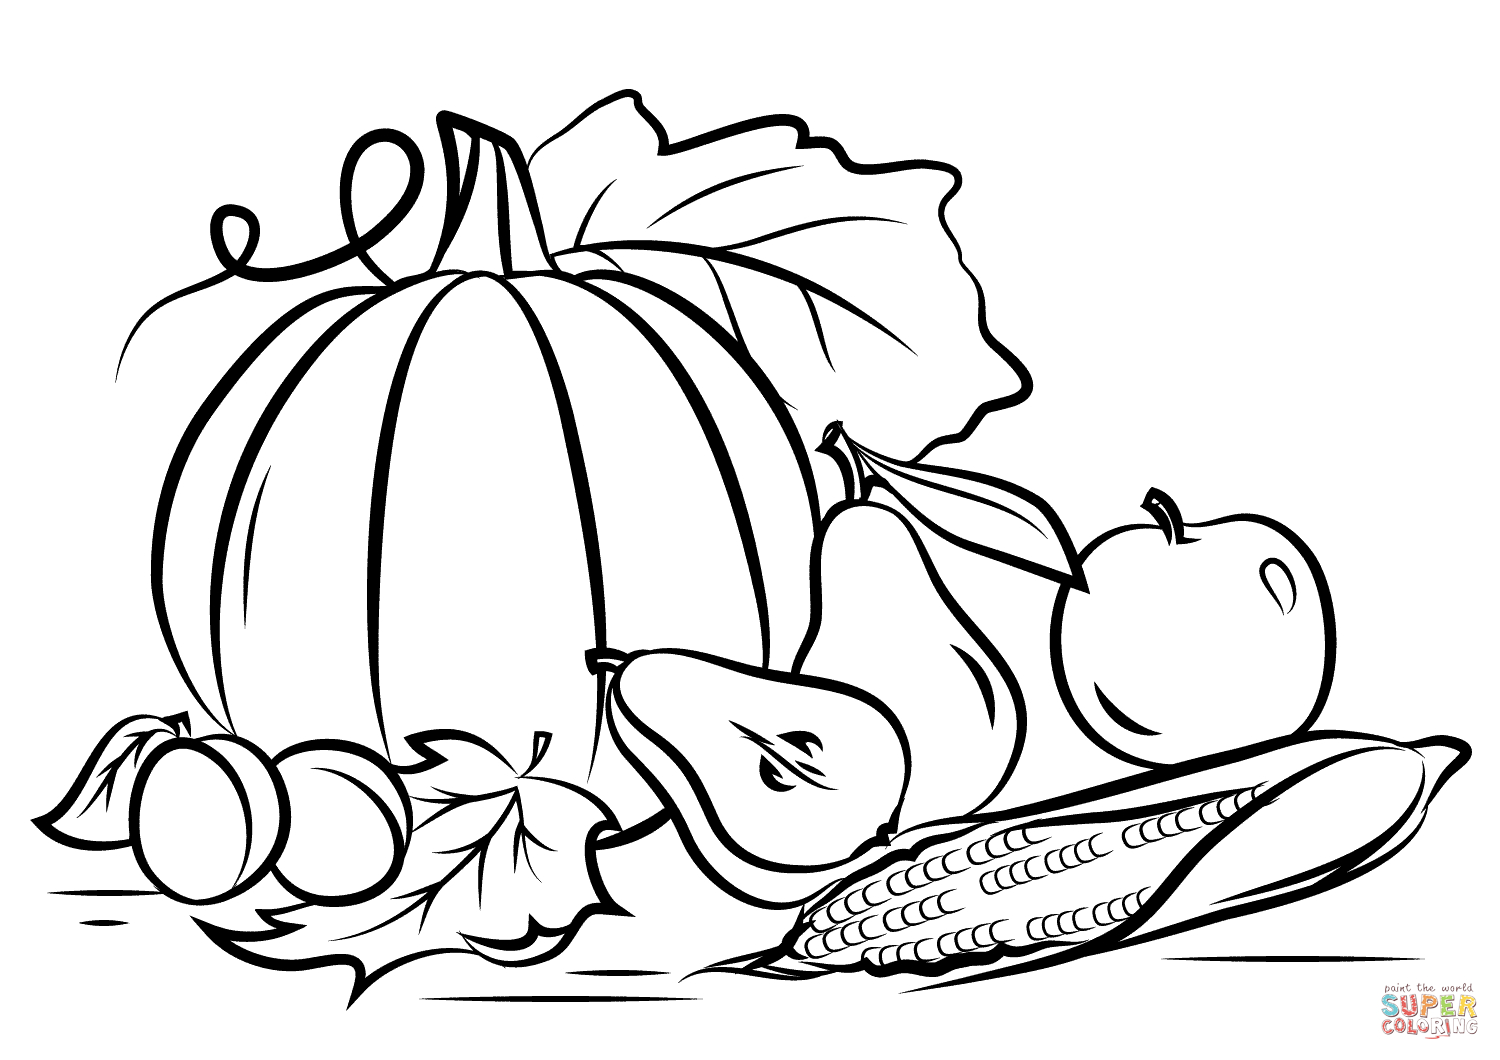 Autumn Harvest Coloring Page | Free Printable Coloring Pages - Free Printable Fall Harvest Coloring Pages